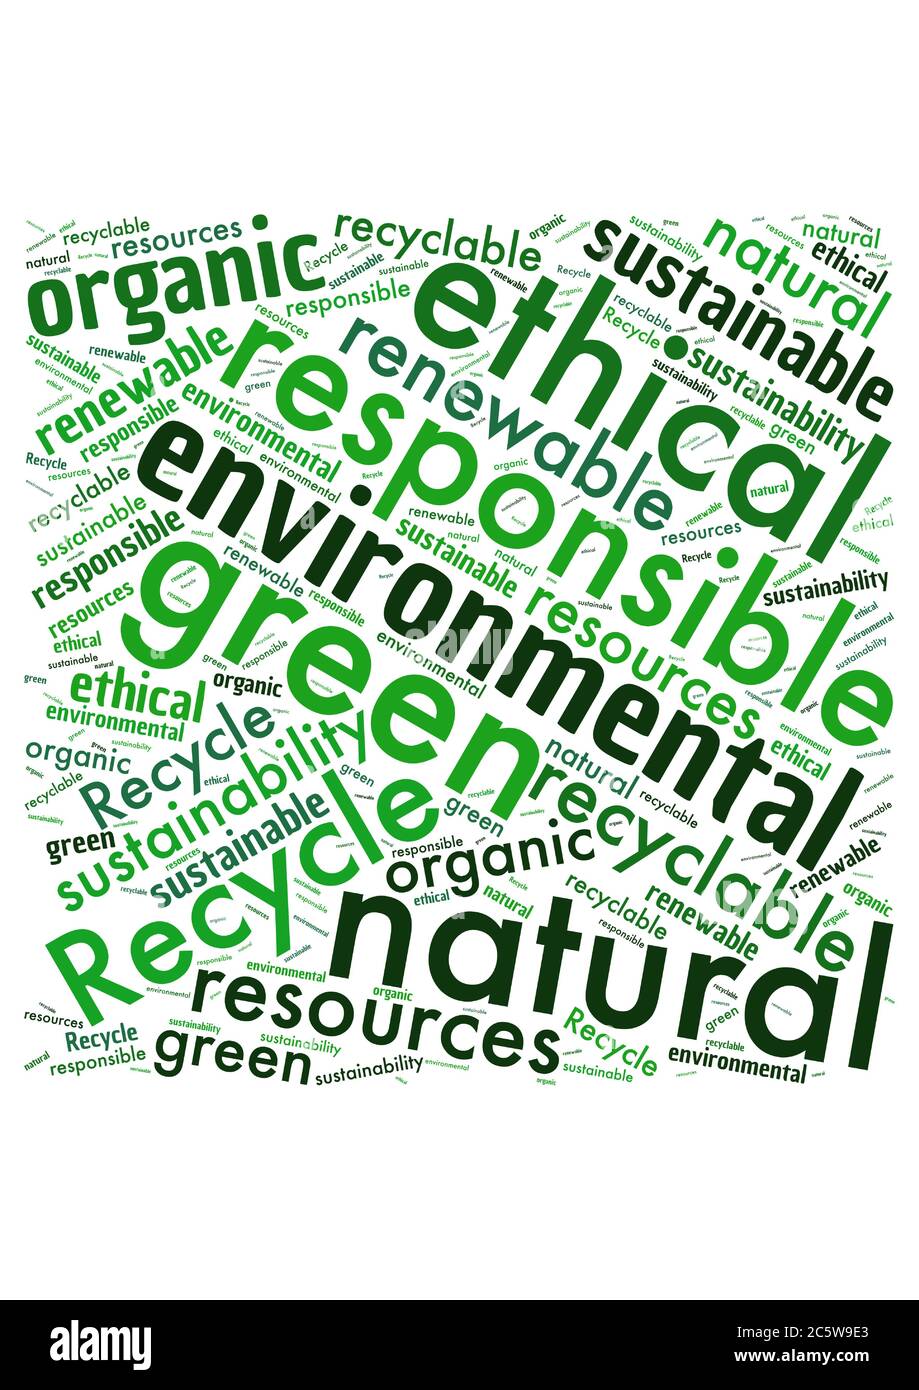 Illustration of a word cloud with words representing the environment and being green Stock Vector